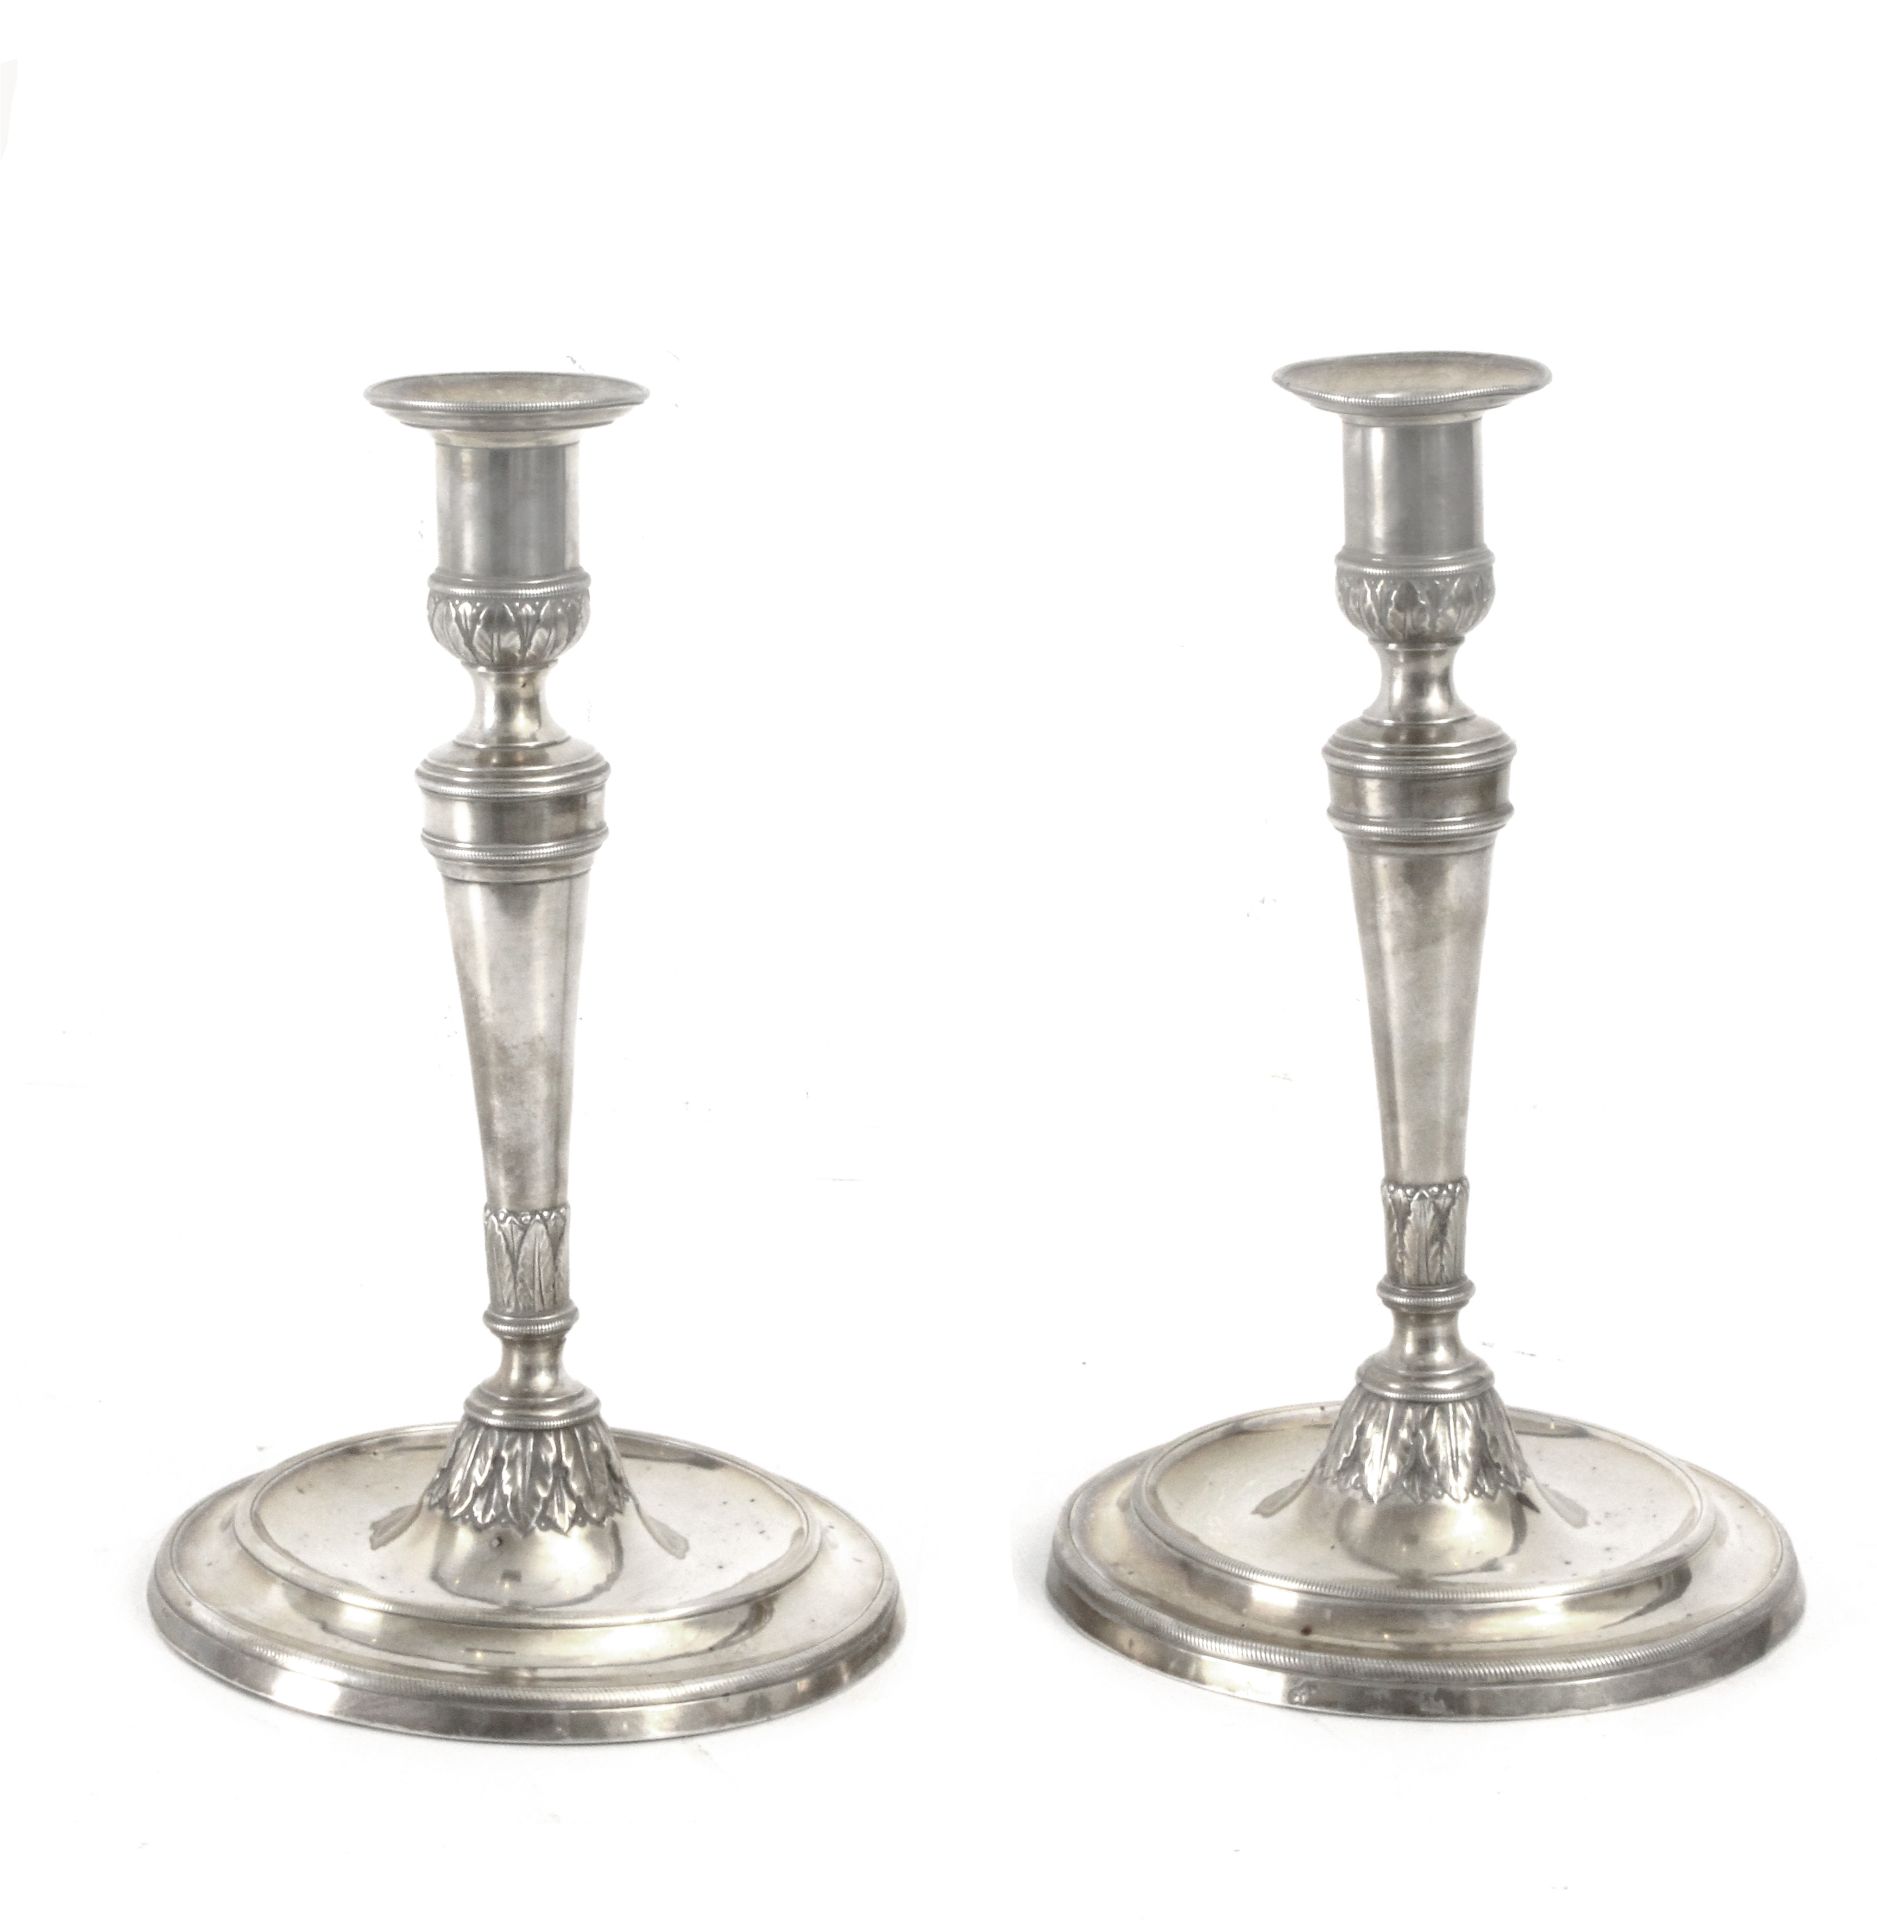 A pair of 18th century-early 19th century Charles IV silver candlesticks